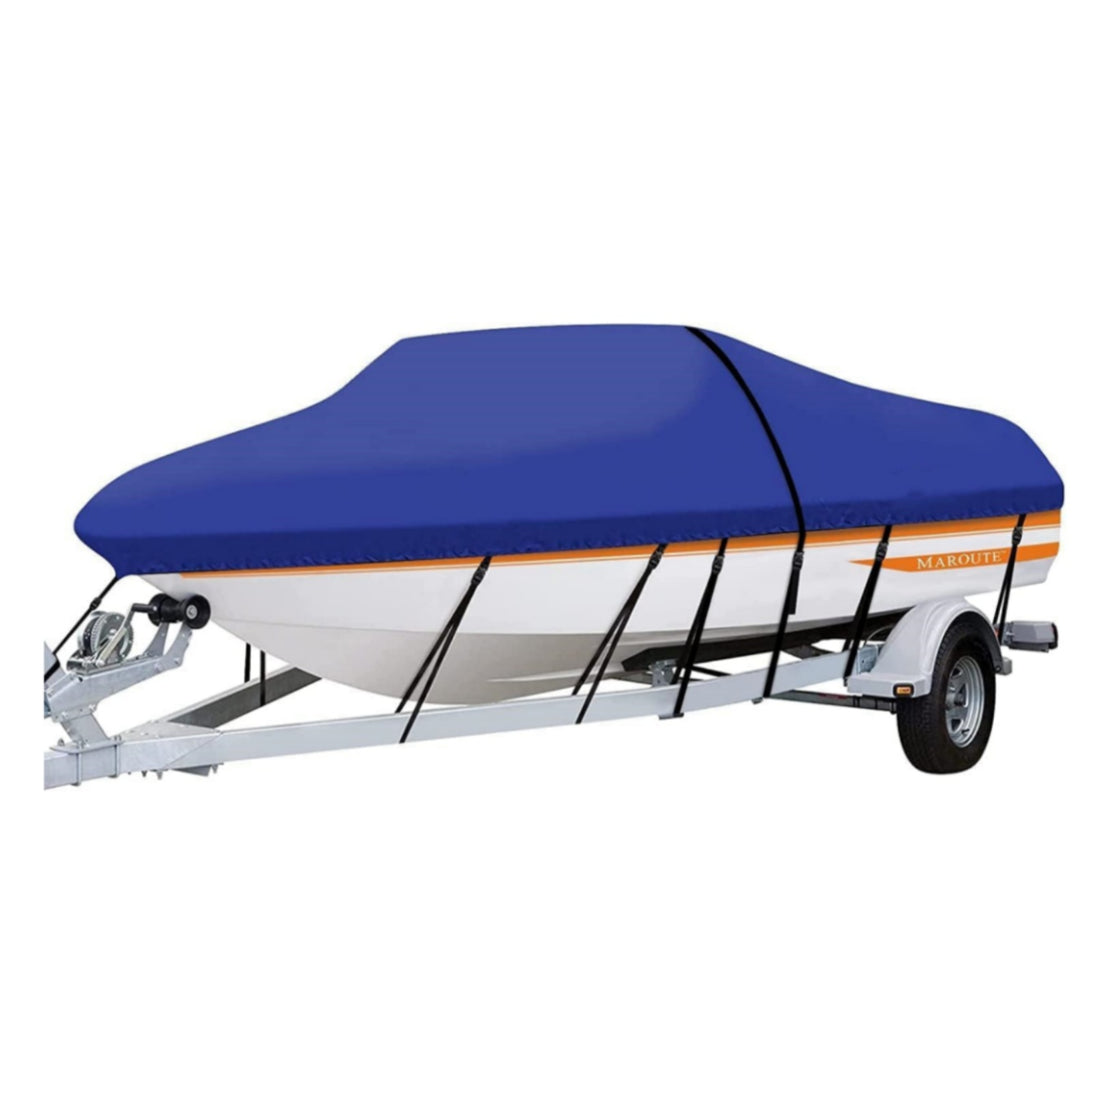 Boat Cover, 600D Waterproof Trailerable Marine Grade Polyster Canvas Fits V-Hull, Tri-Hull Fishing Boat, Runabout, SKi Boat, Bass Boat, up to (Length 23ft-24ft Beam Width Up to 102") (Copy)